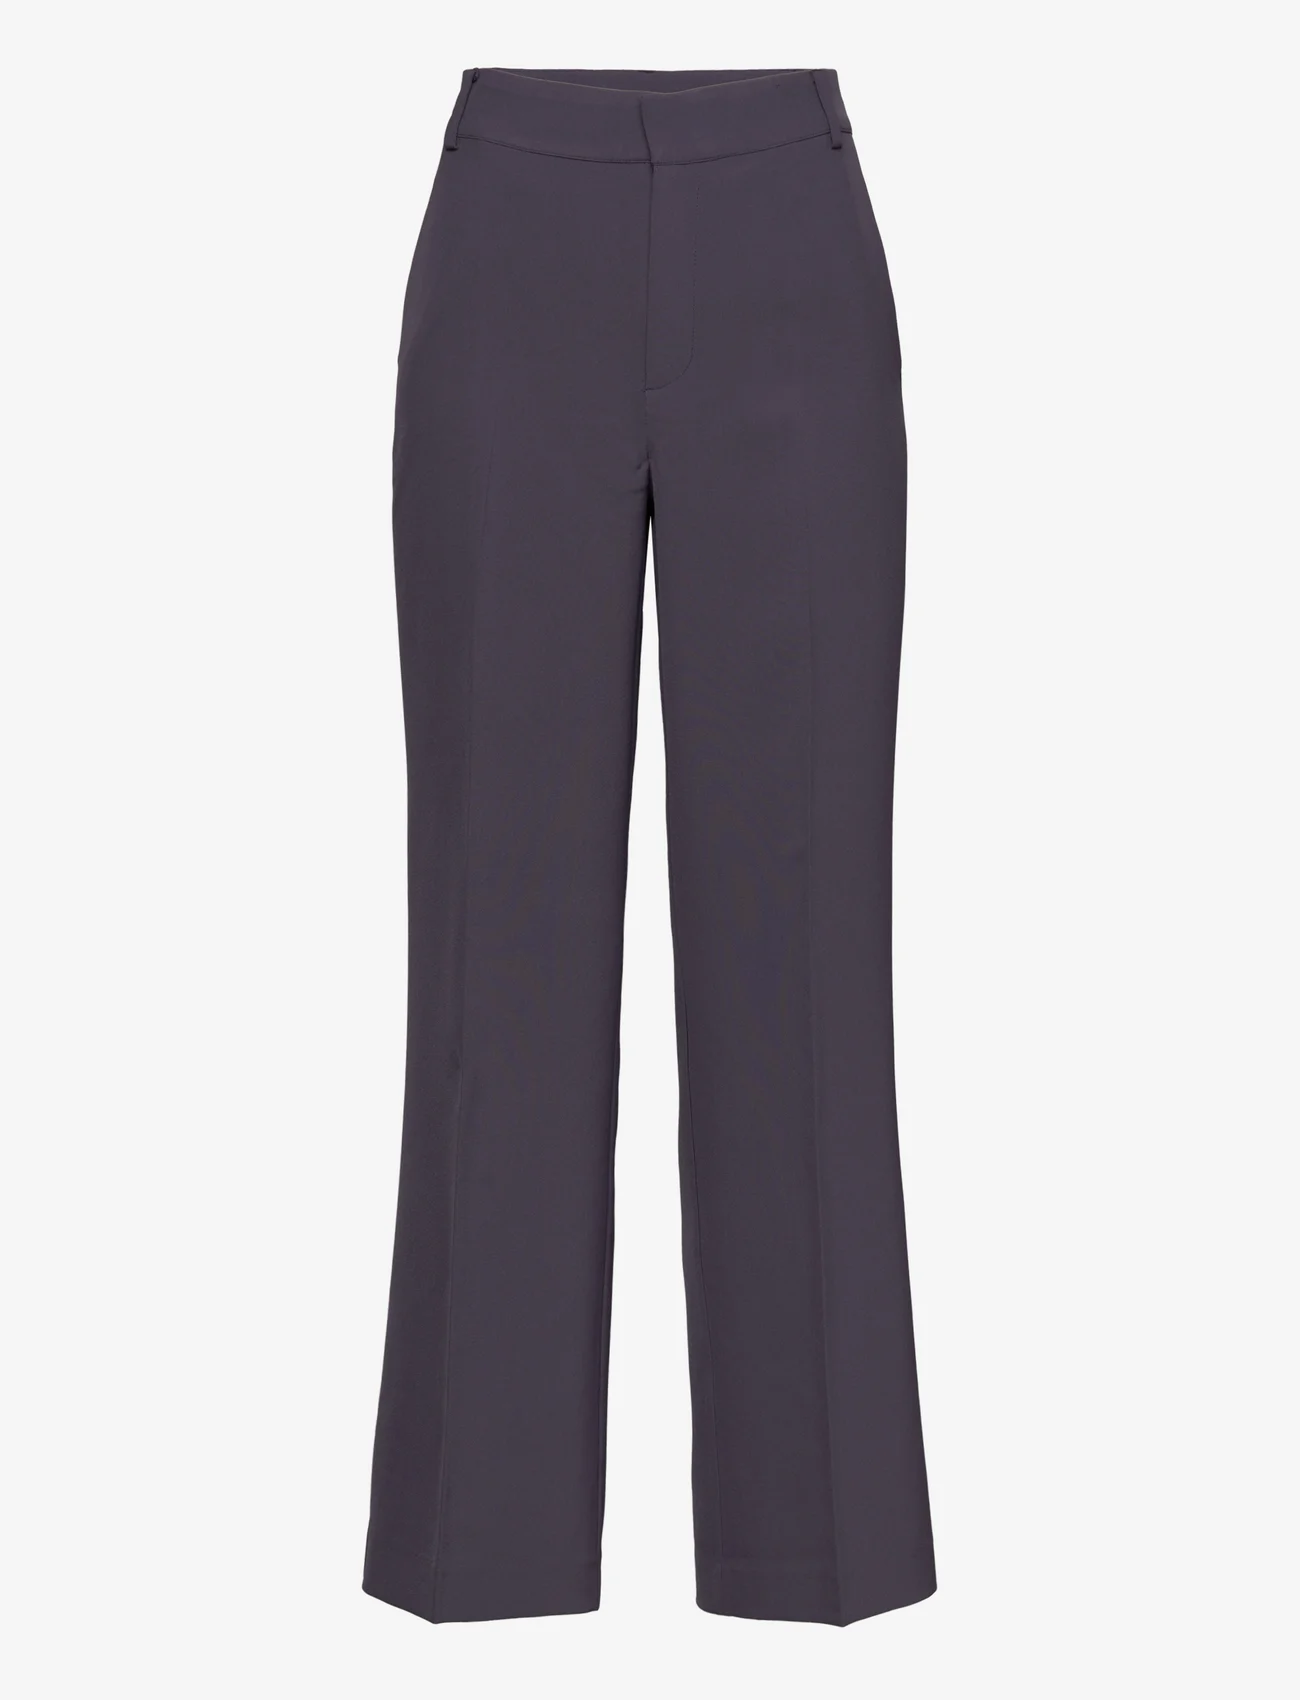 My Essential Wardrobe - 29 THE TAILORED PANT - tailored trousers - graystone - 0